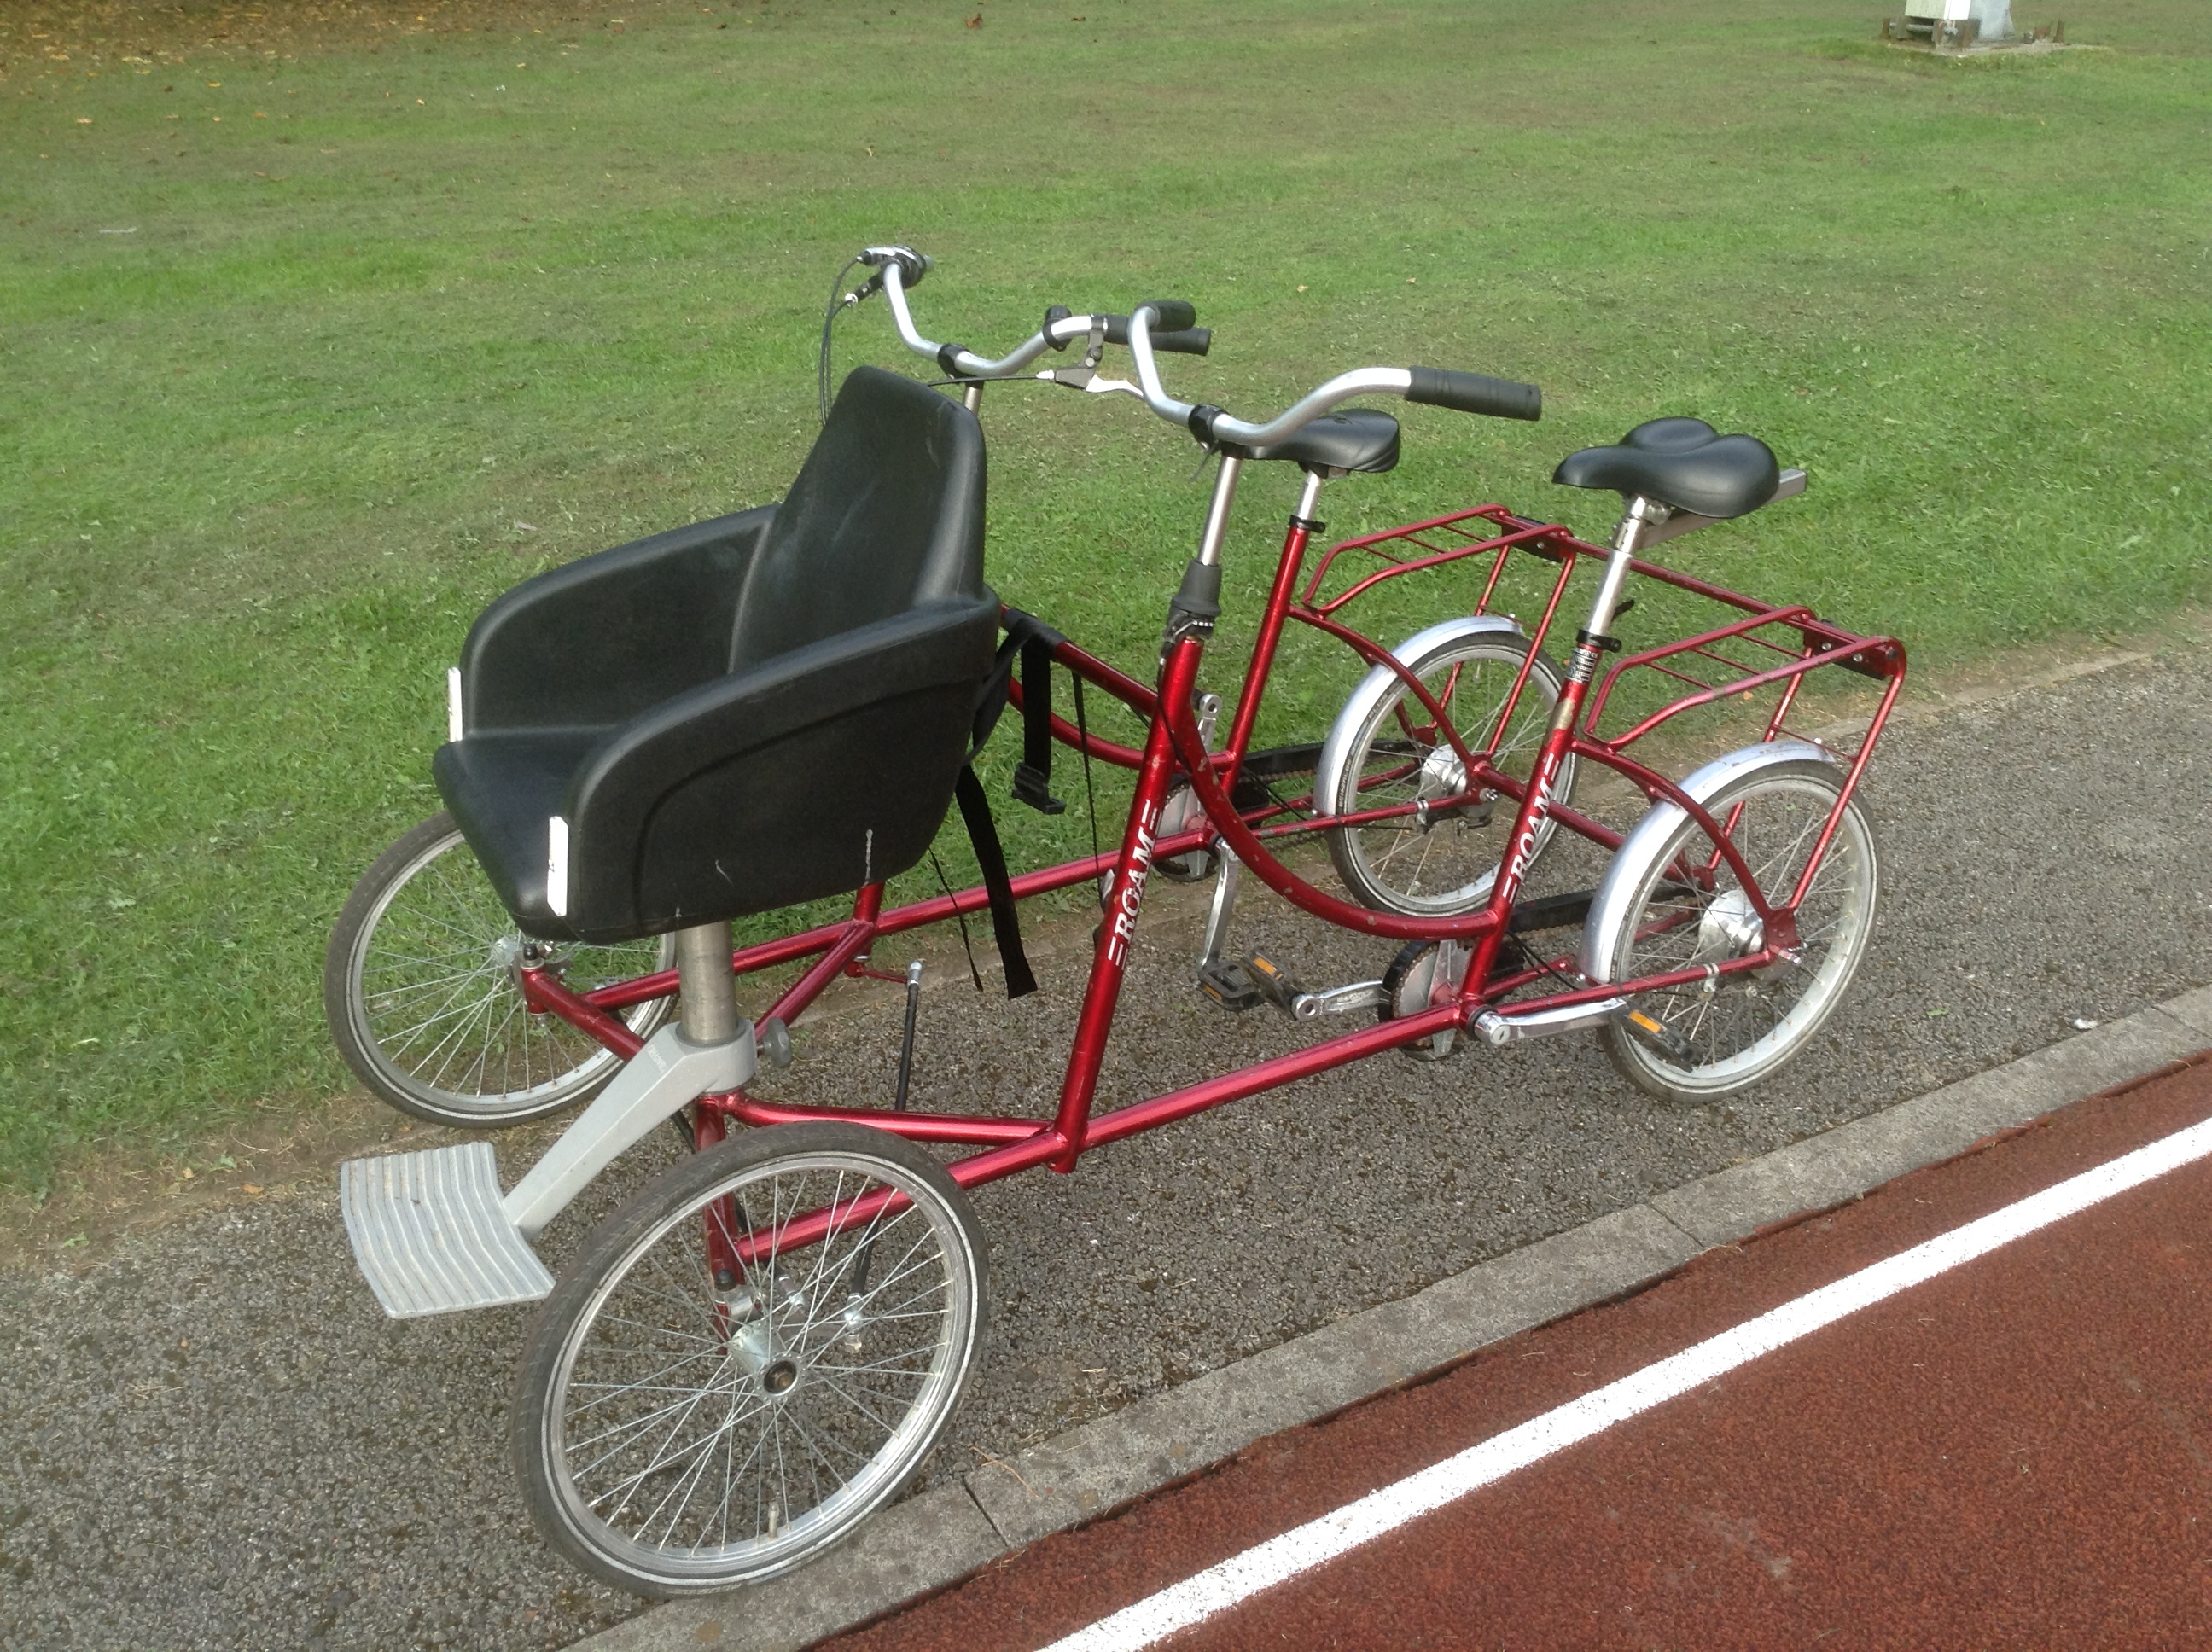 side-by-side tandem with self-transfer seat